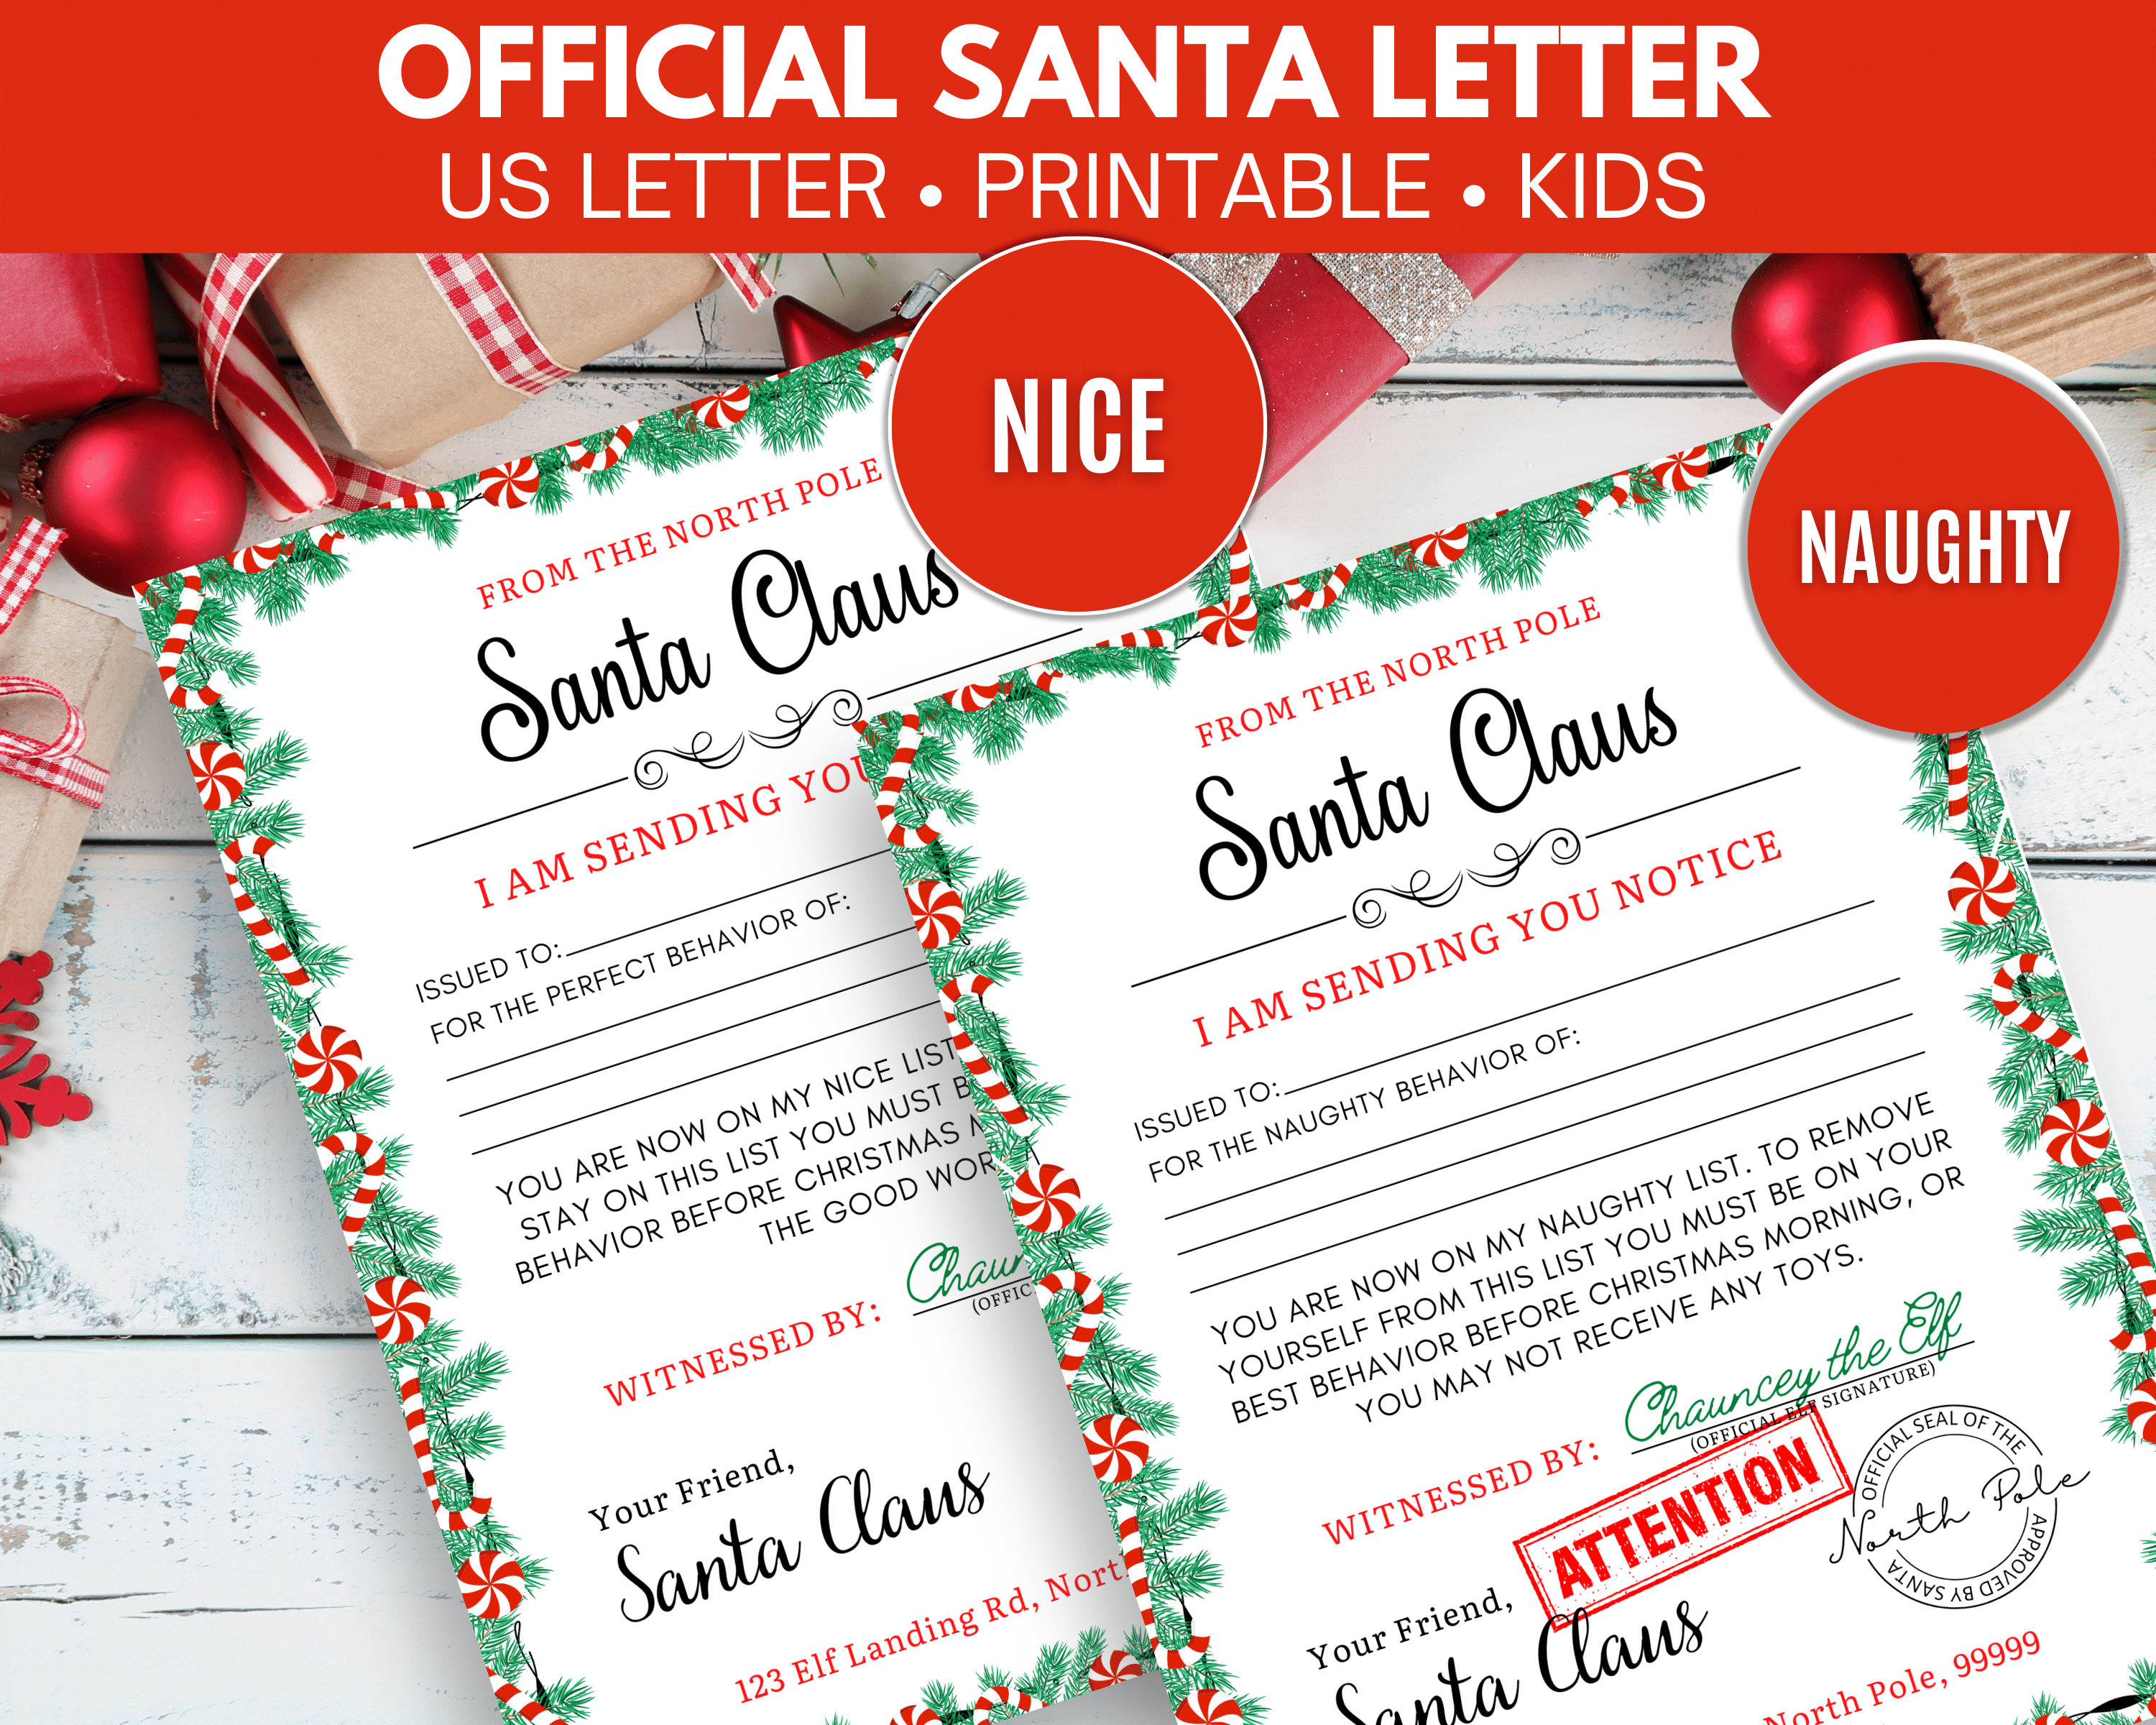 Printable Santa's Naughty List Certificate, Editable Official North Pole  Name PDF Template, Personalized Christmas Digital Download Reusable 